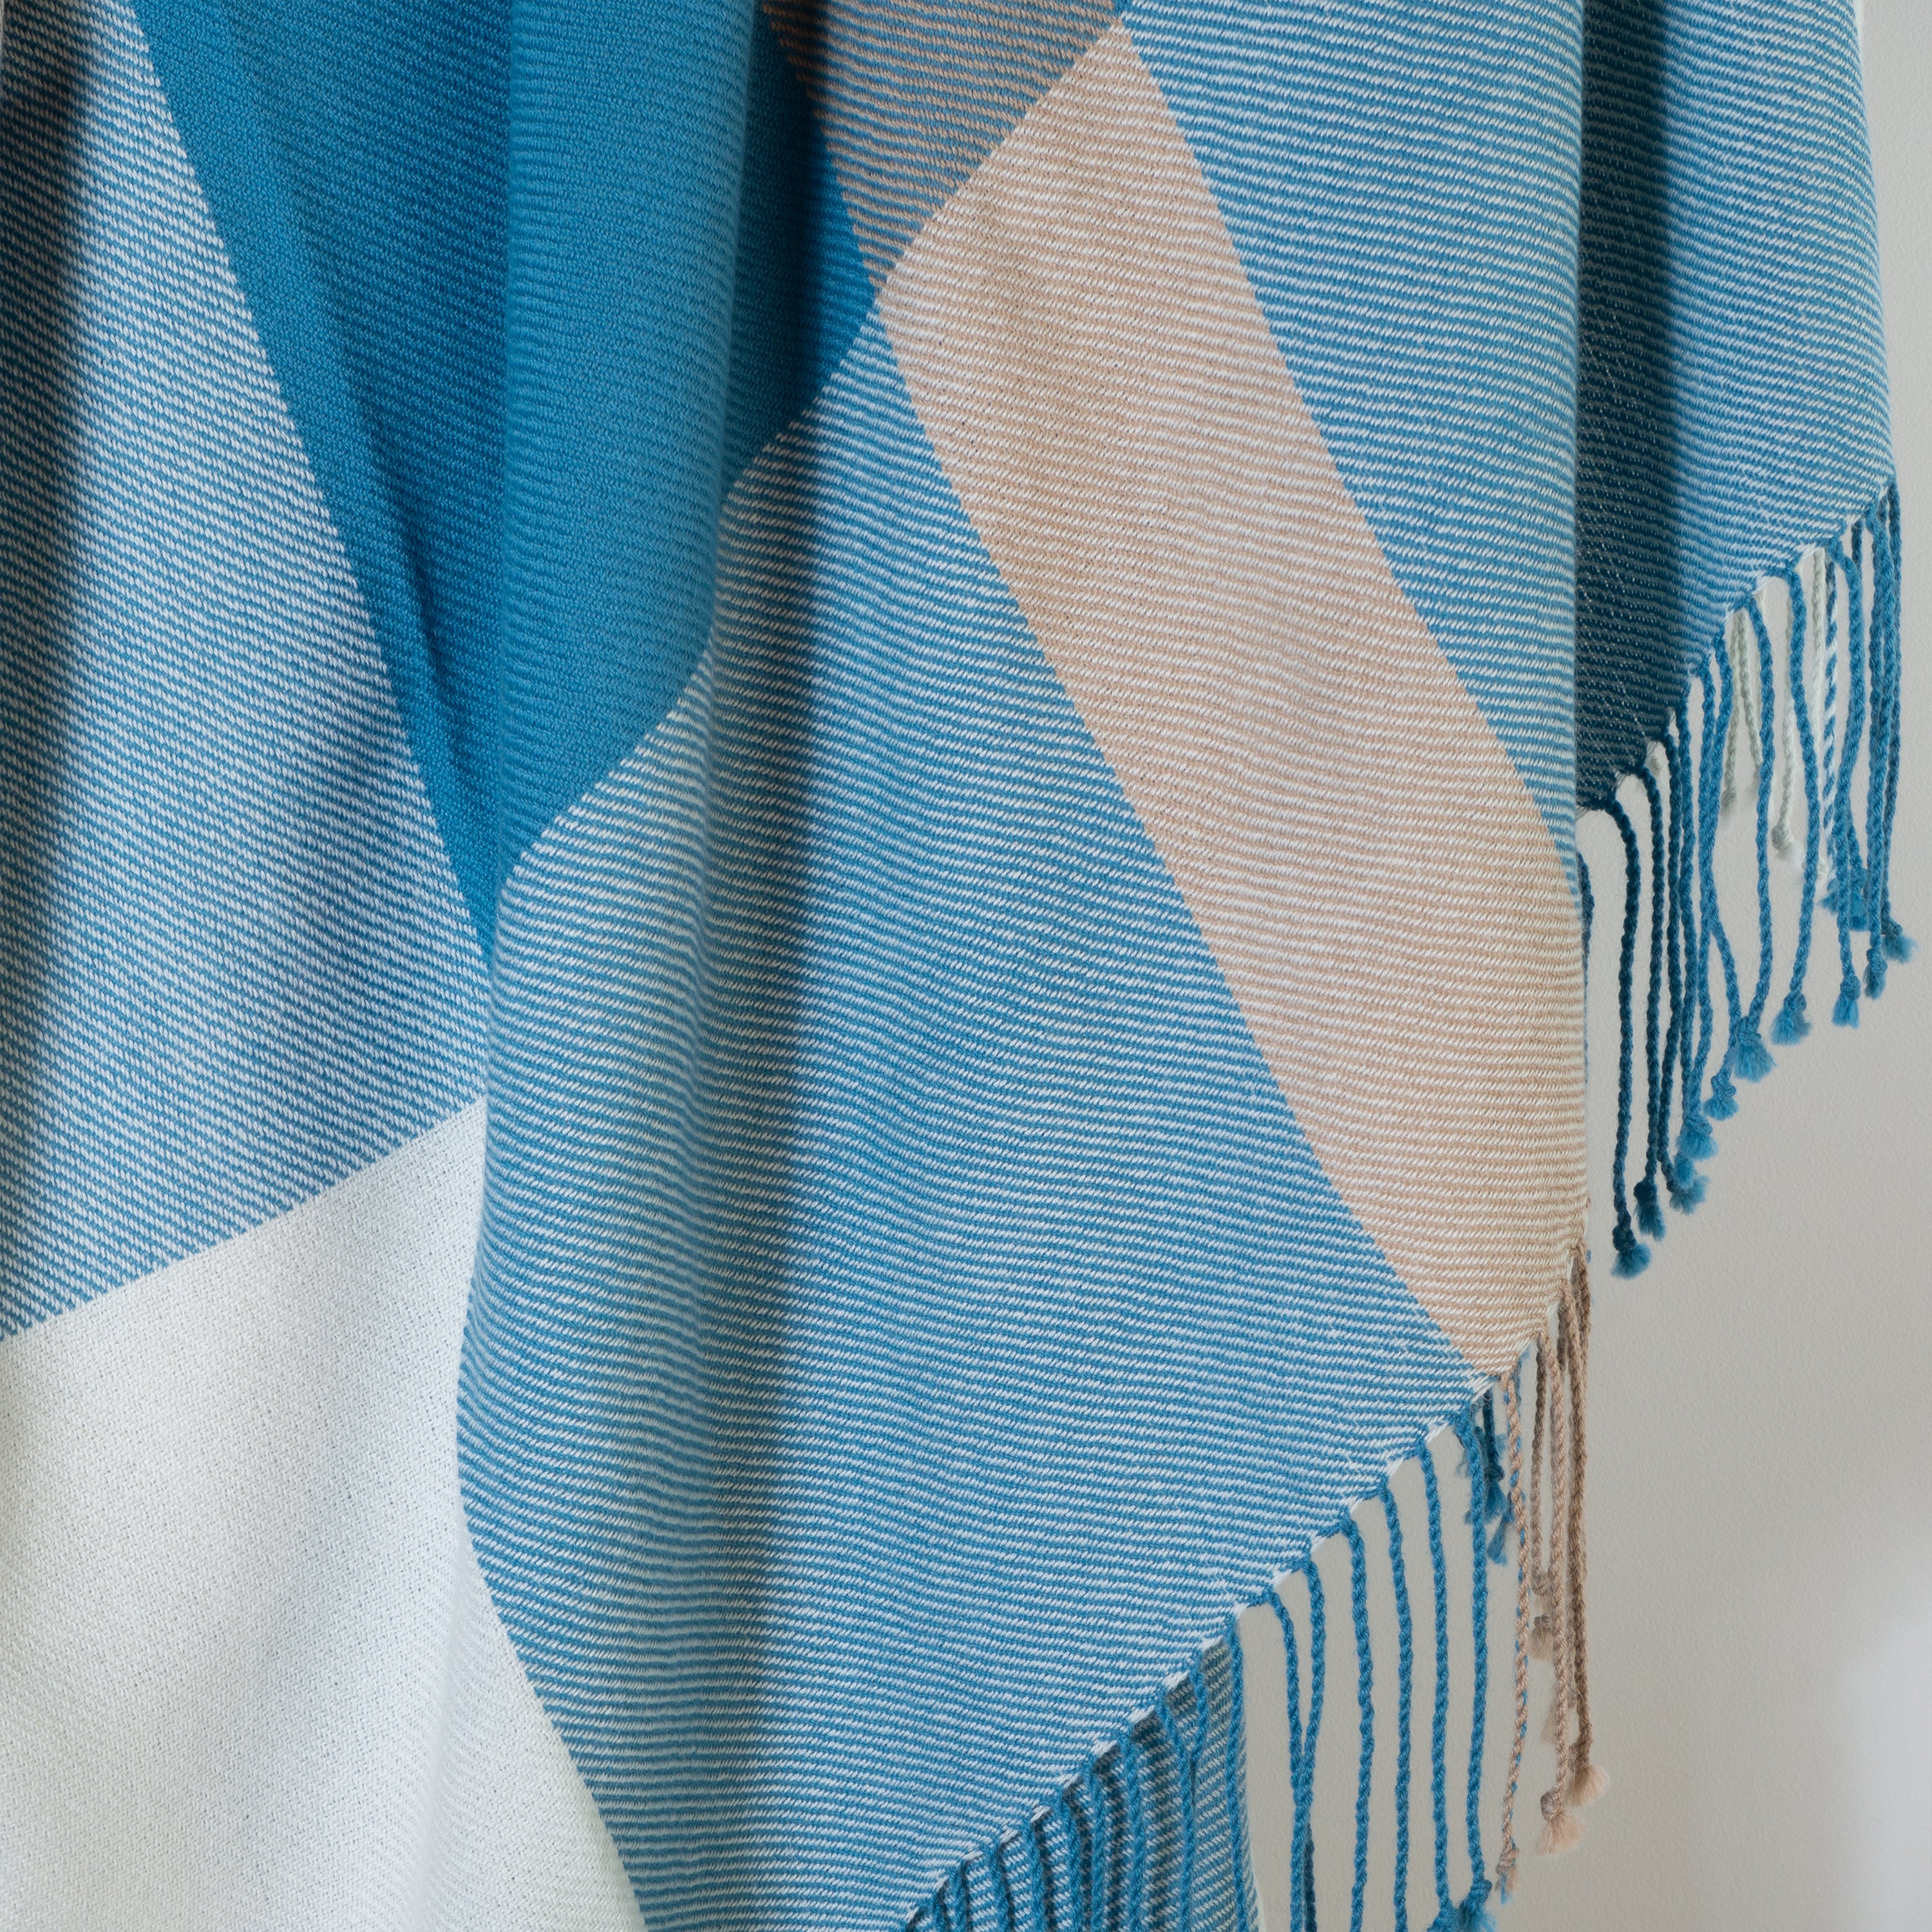 Handwoven aqua, light brown and white baby alpaca throw blanket from Peru up close